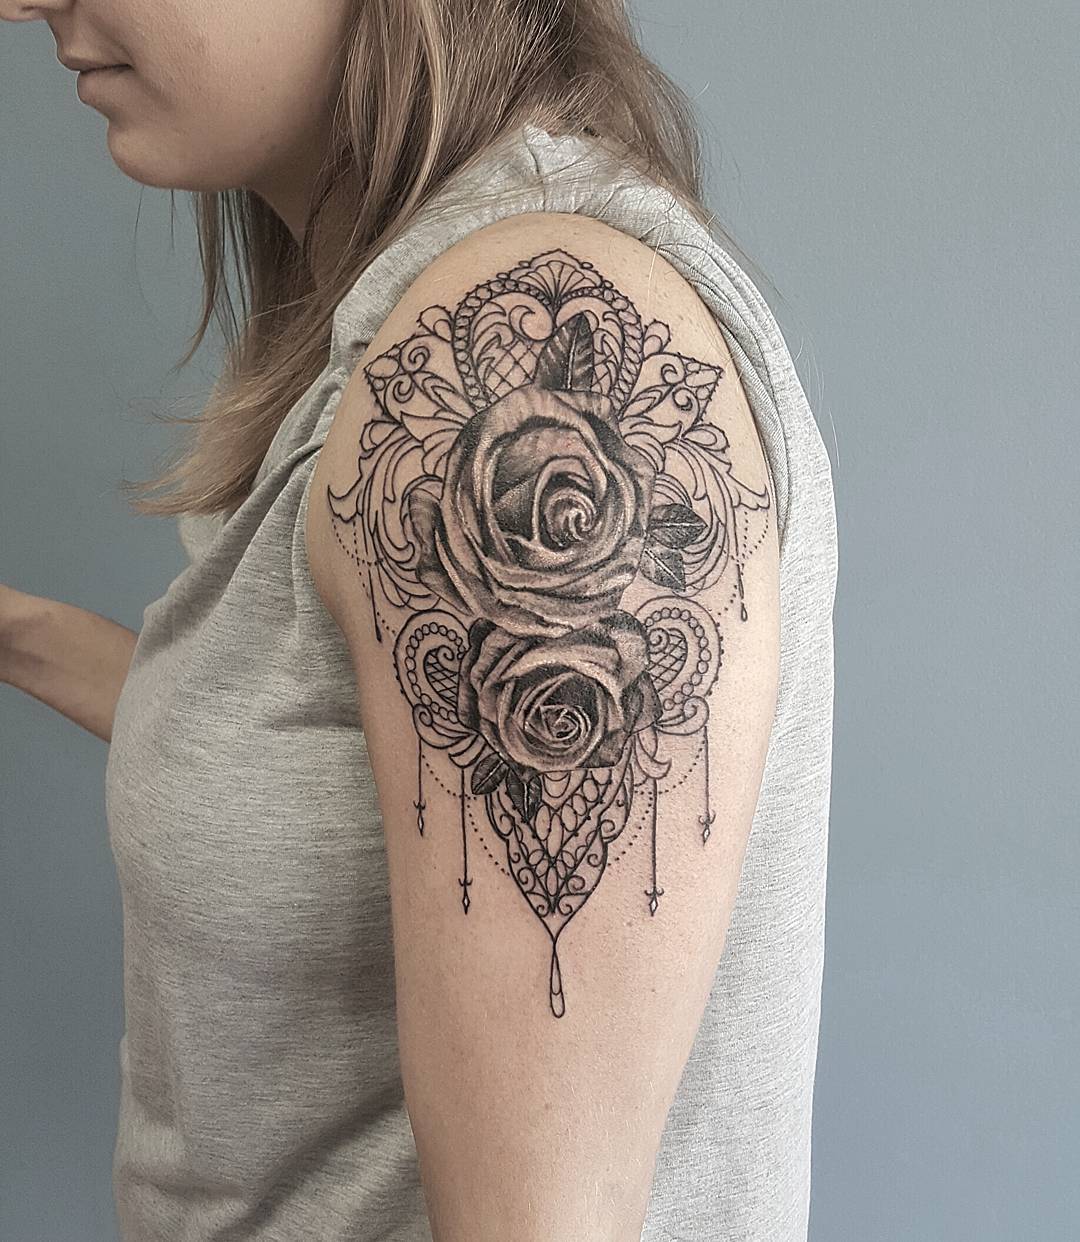 60 Best Lace Tattoo Designs & Meanings Sexy and Stunning (2019)